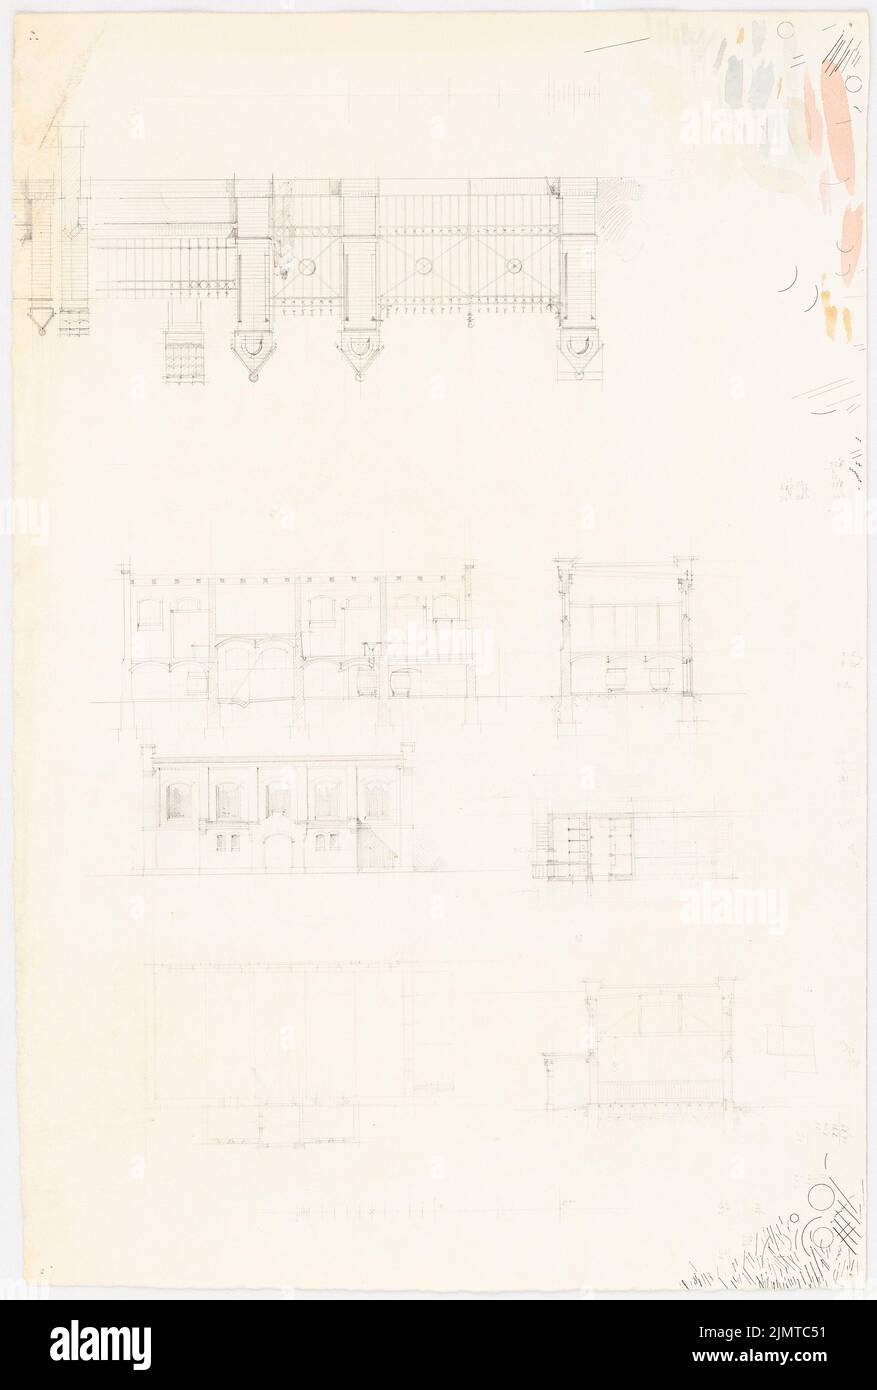 Baltzer Johannes (1862-1940), school. Toilet building and enclosure (1889): floor plan ground floor (twice), tearing the entrance side, longitudinal section, cross -section, detail of the enclosure: View Wall pillars and grid, calculation. Pencil on cardboard, 51.8 x 35 cm (including scan edges) Baltzer Johannes  (1862-1940): Schule. Toilettengebäude und Einfriedung Stock Photo